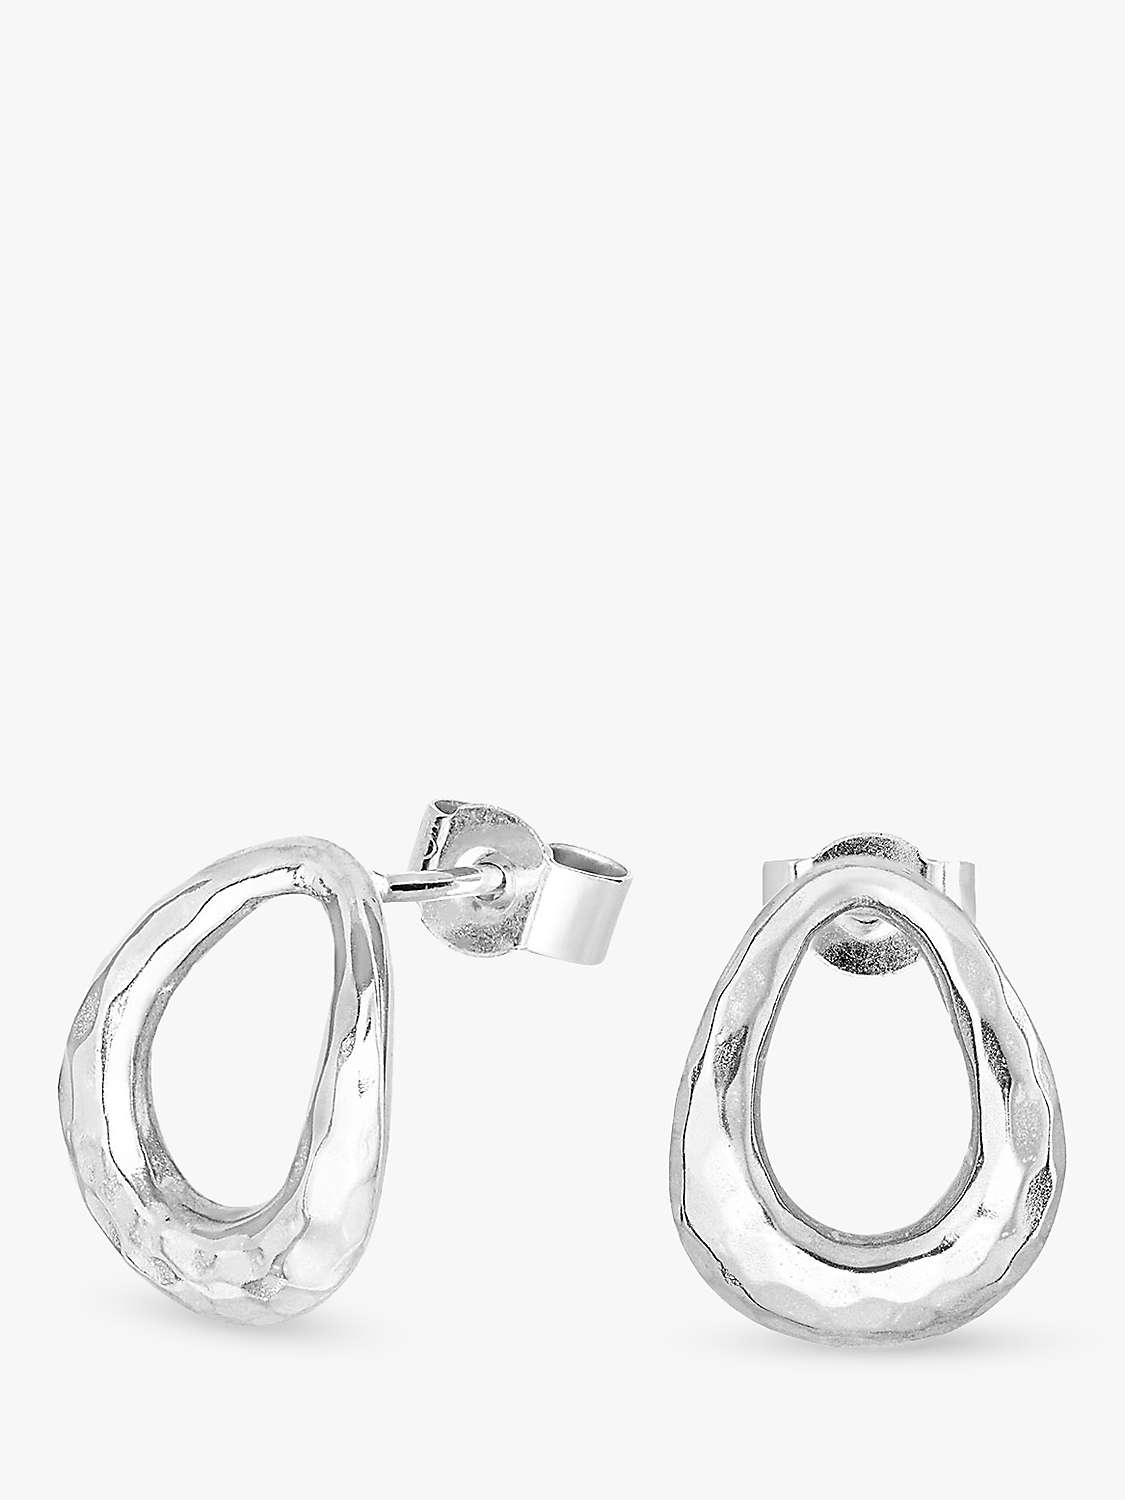 Buy Dower & Hall Sterling Silver Large Entwined Oval Stud Earrings, Silver Online at johnlewis.com